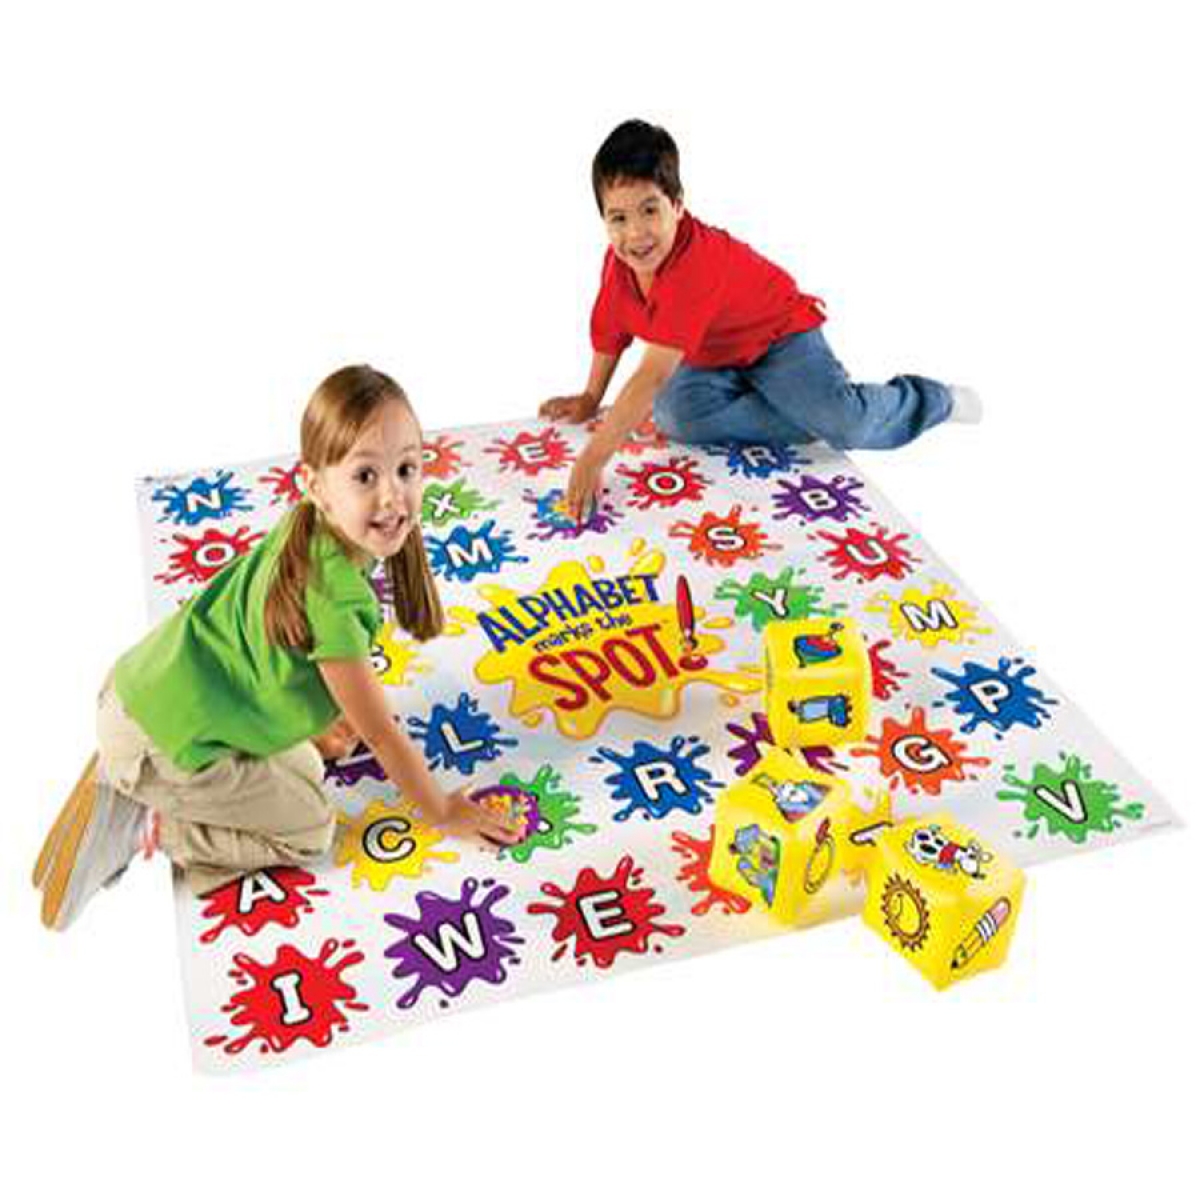 Learning Resources Maths Marks The Spot Maths Activity Set 